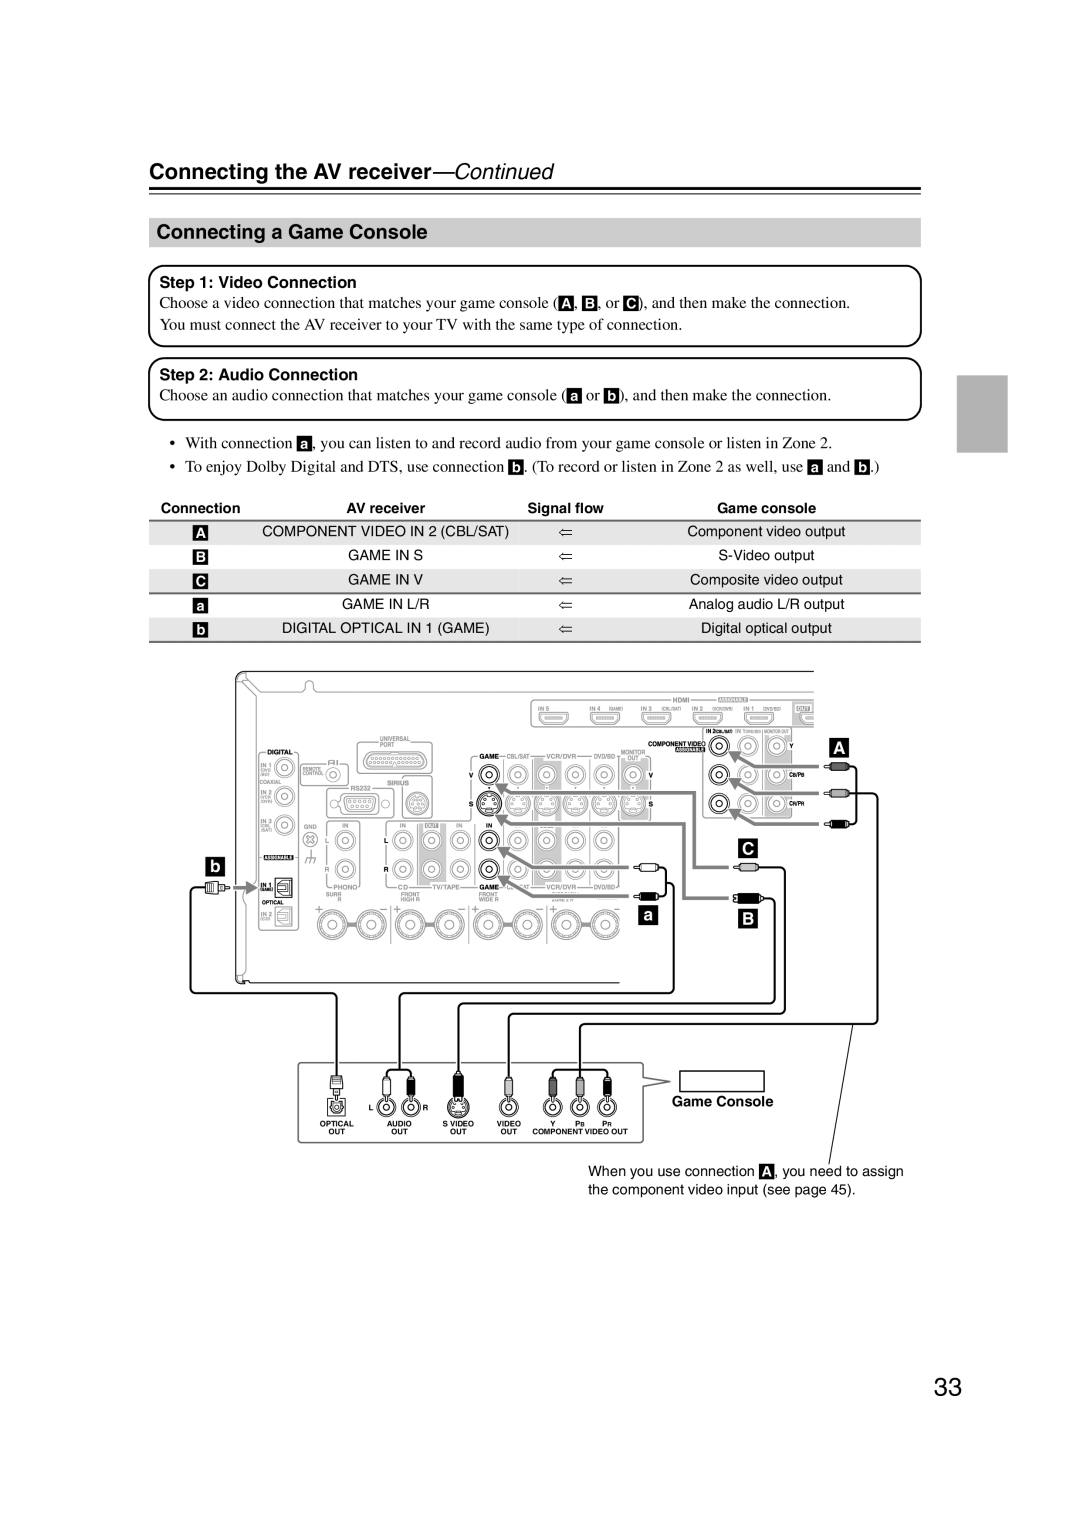 Onkyo TX-SR707 instruction manual Connecting a Game Console, Connecting the AV receiver-Continued 